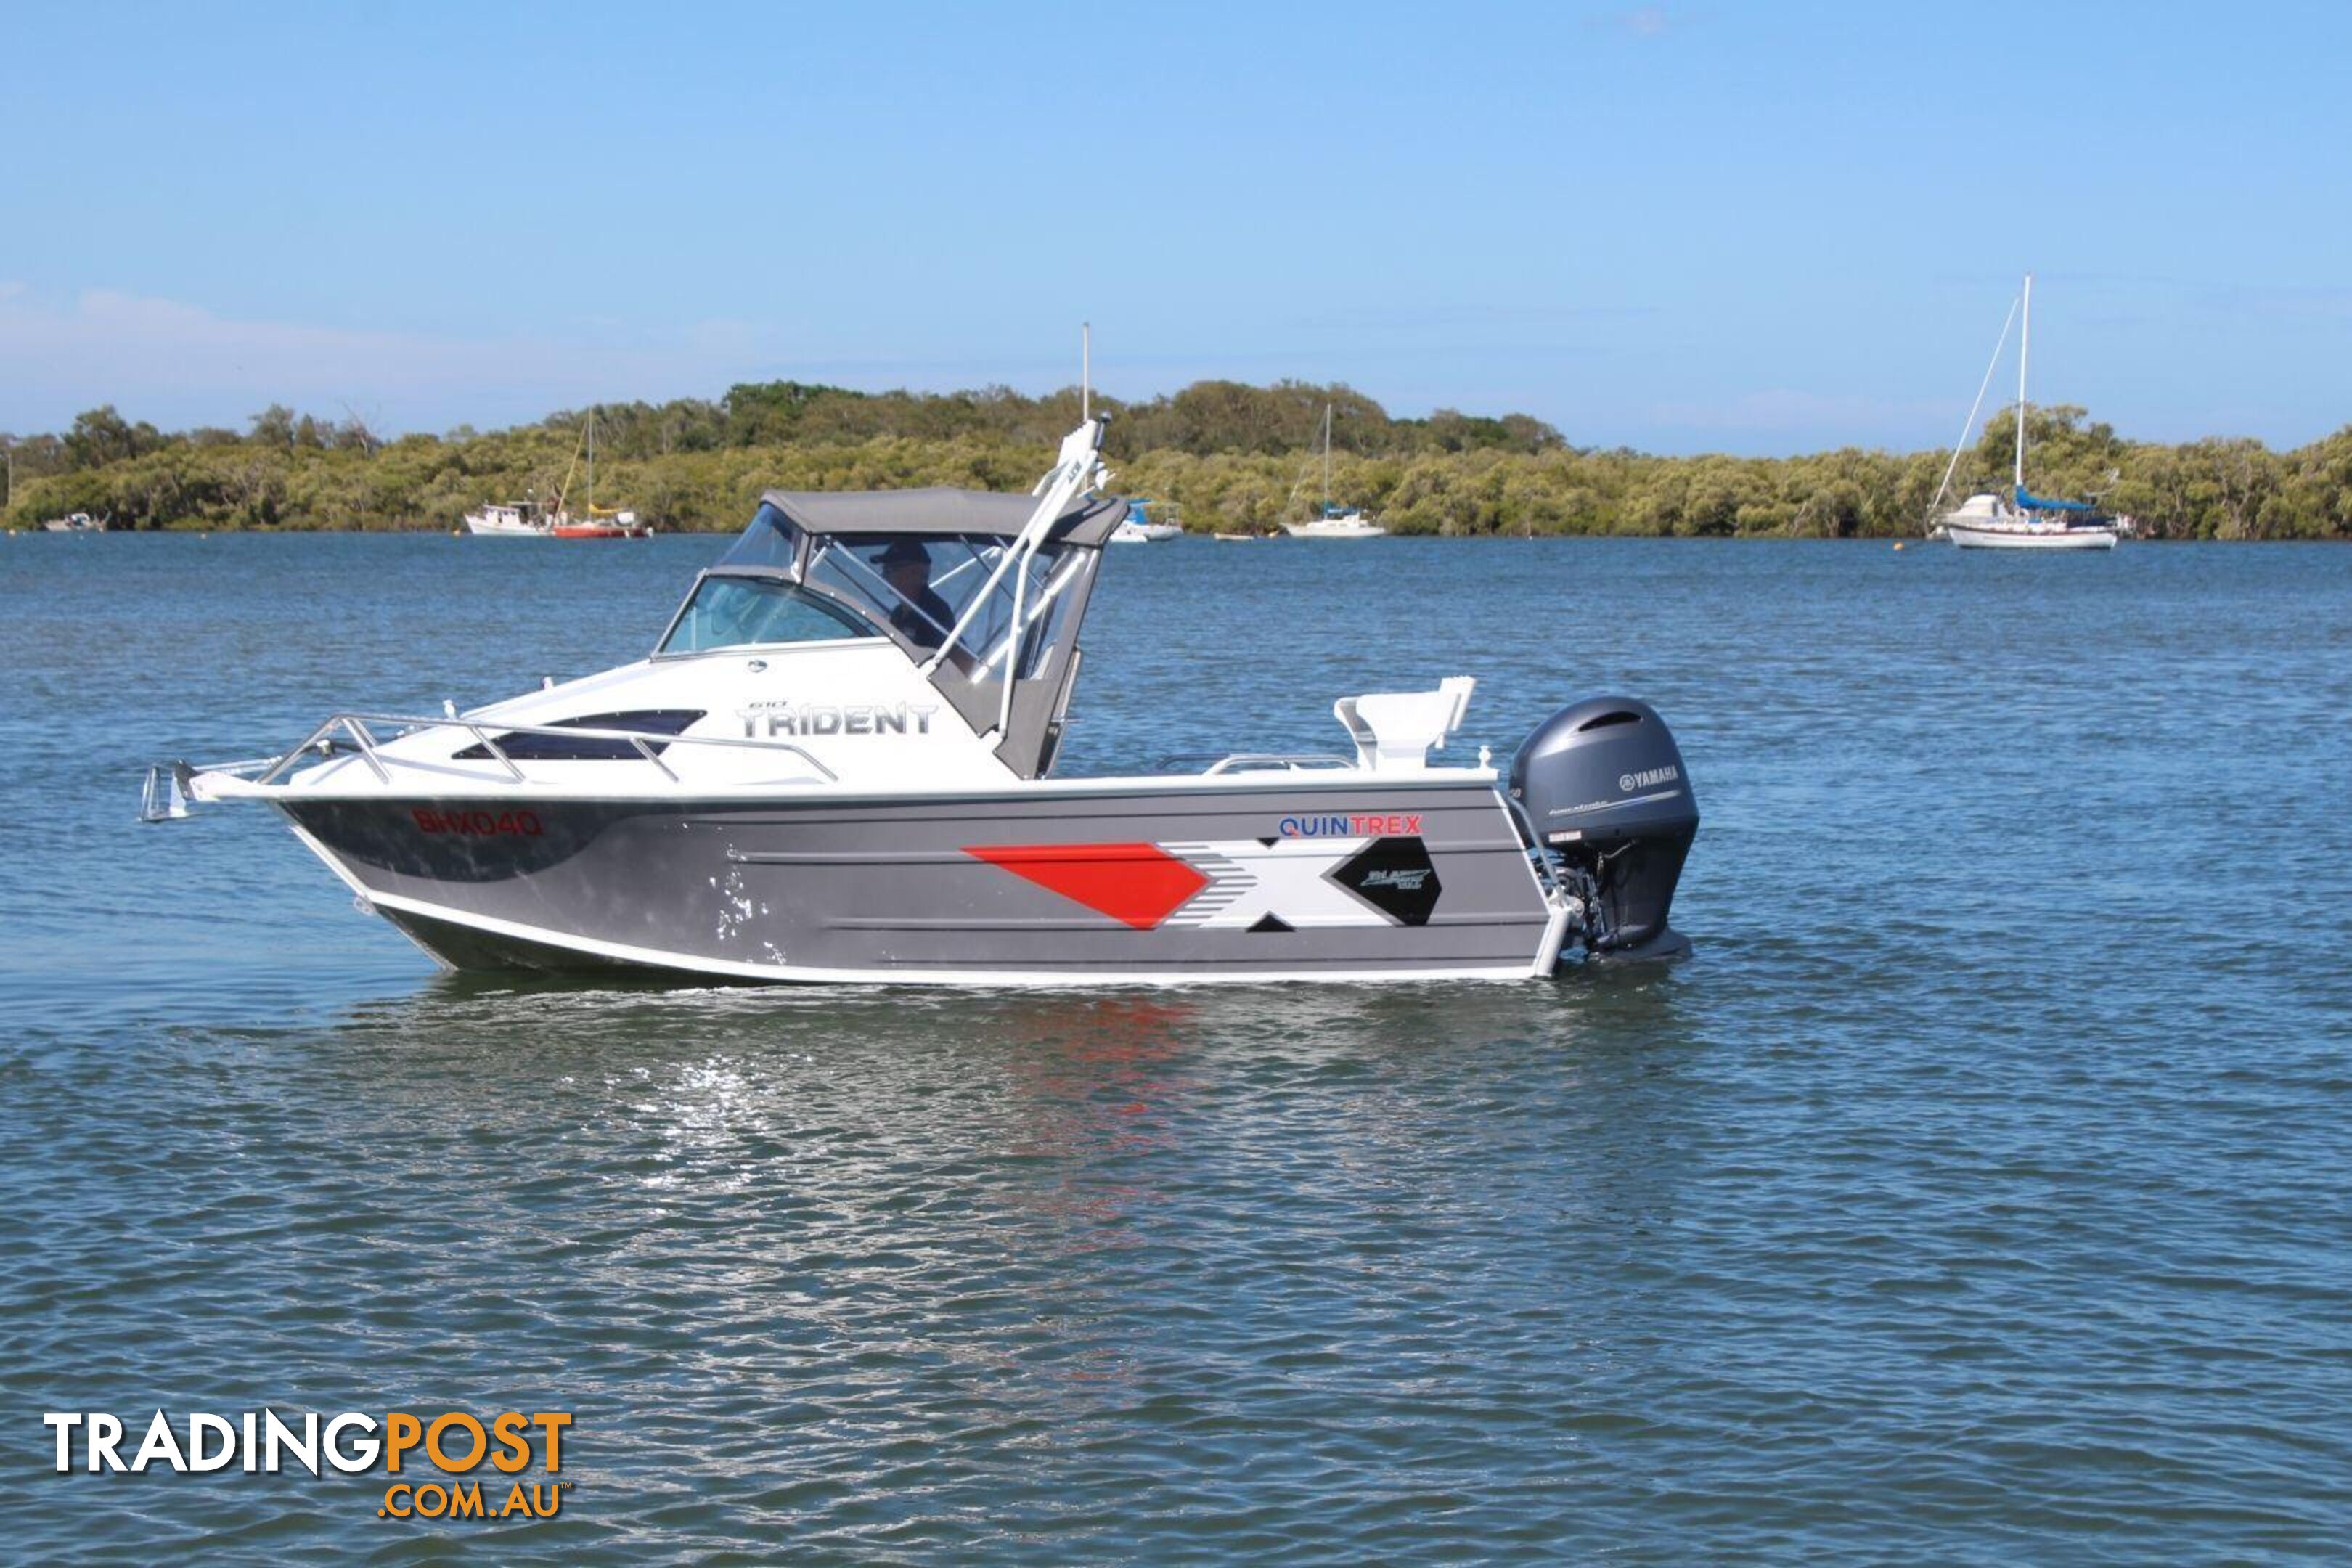 Quintrex 610 Trident + Yamaha F130hp 4-Stroke - Pack 1 for sale online prices